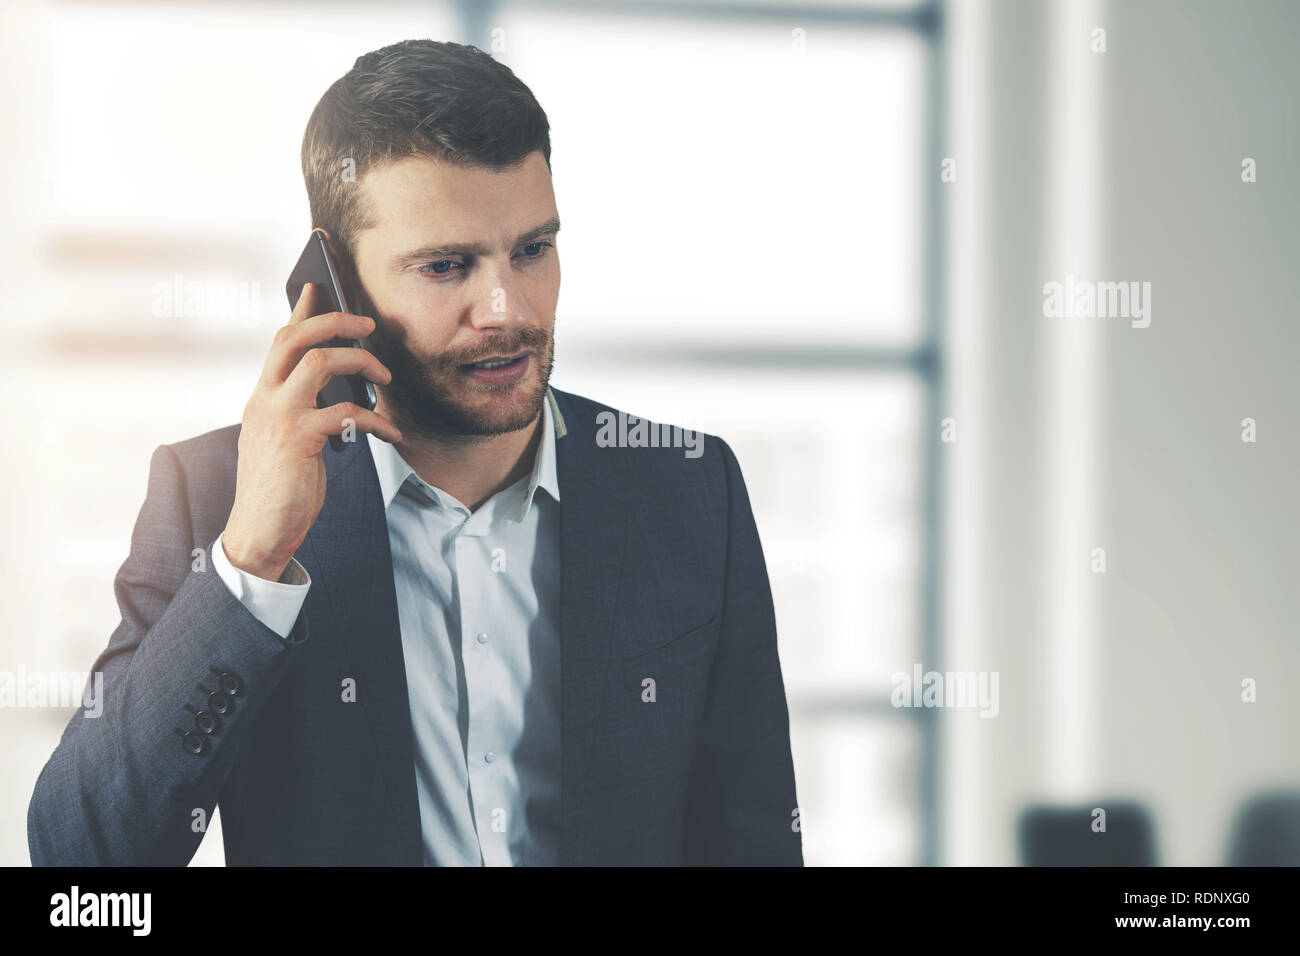 Business Communication - young businessman talking on the phone in office Banque D'Images